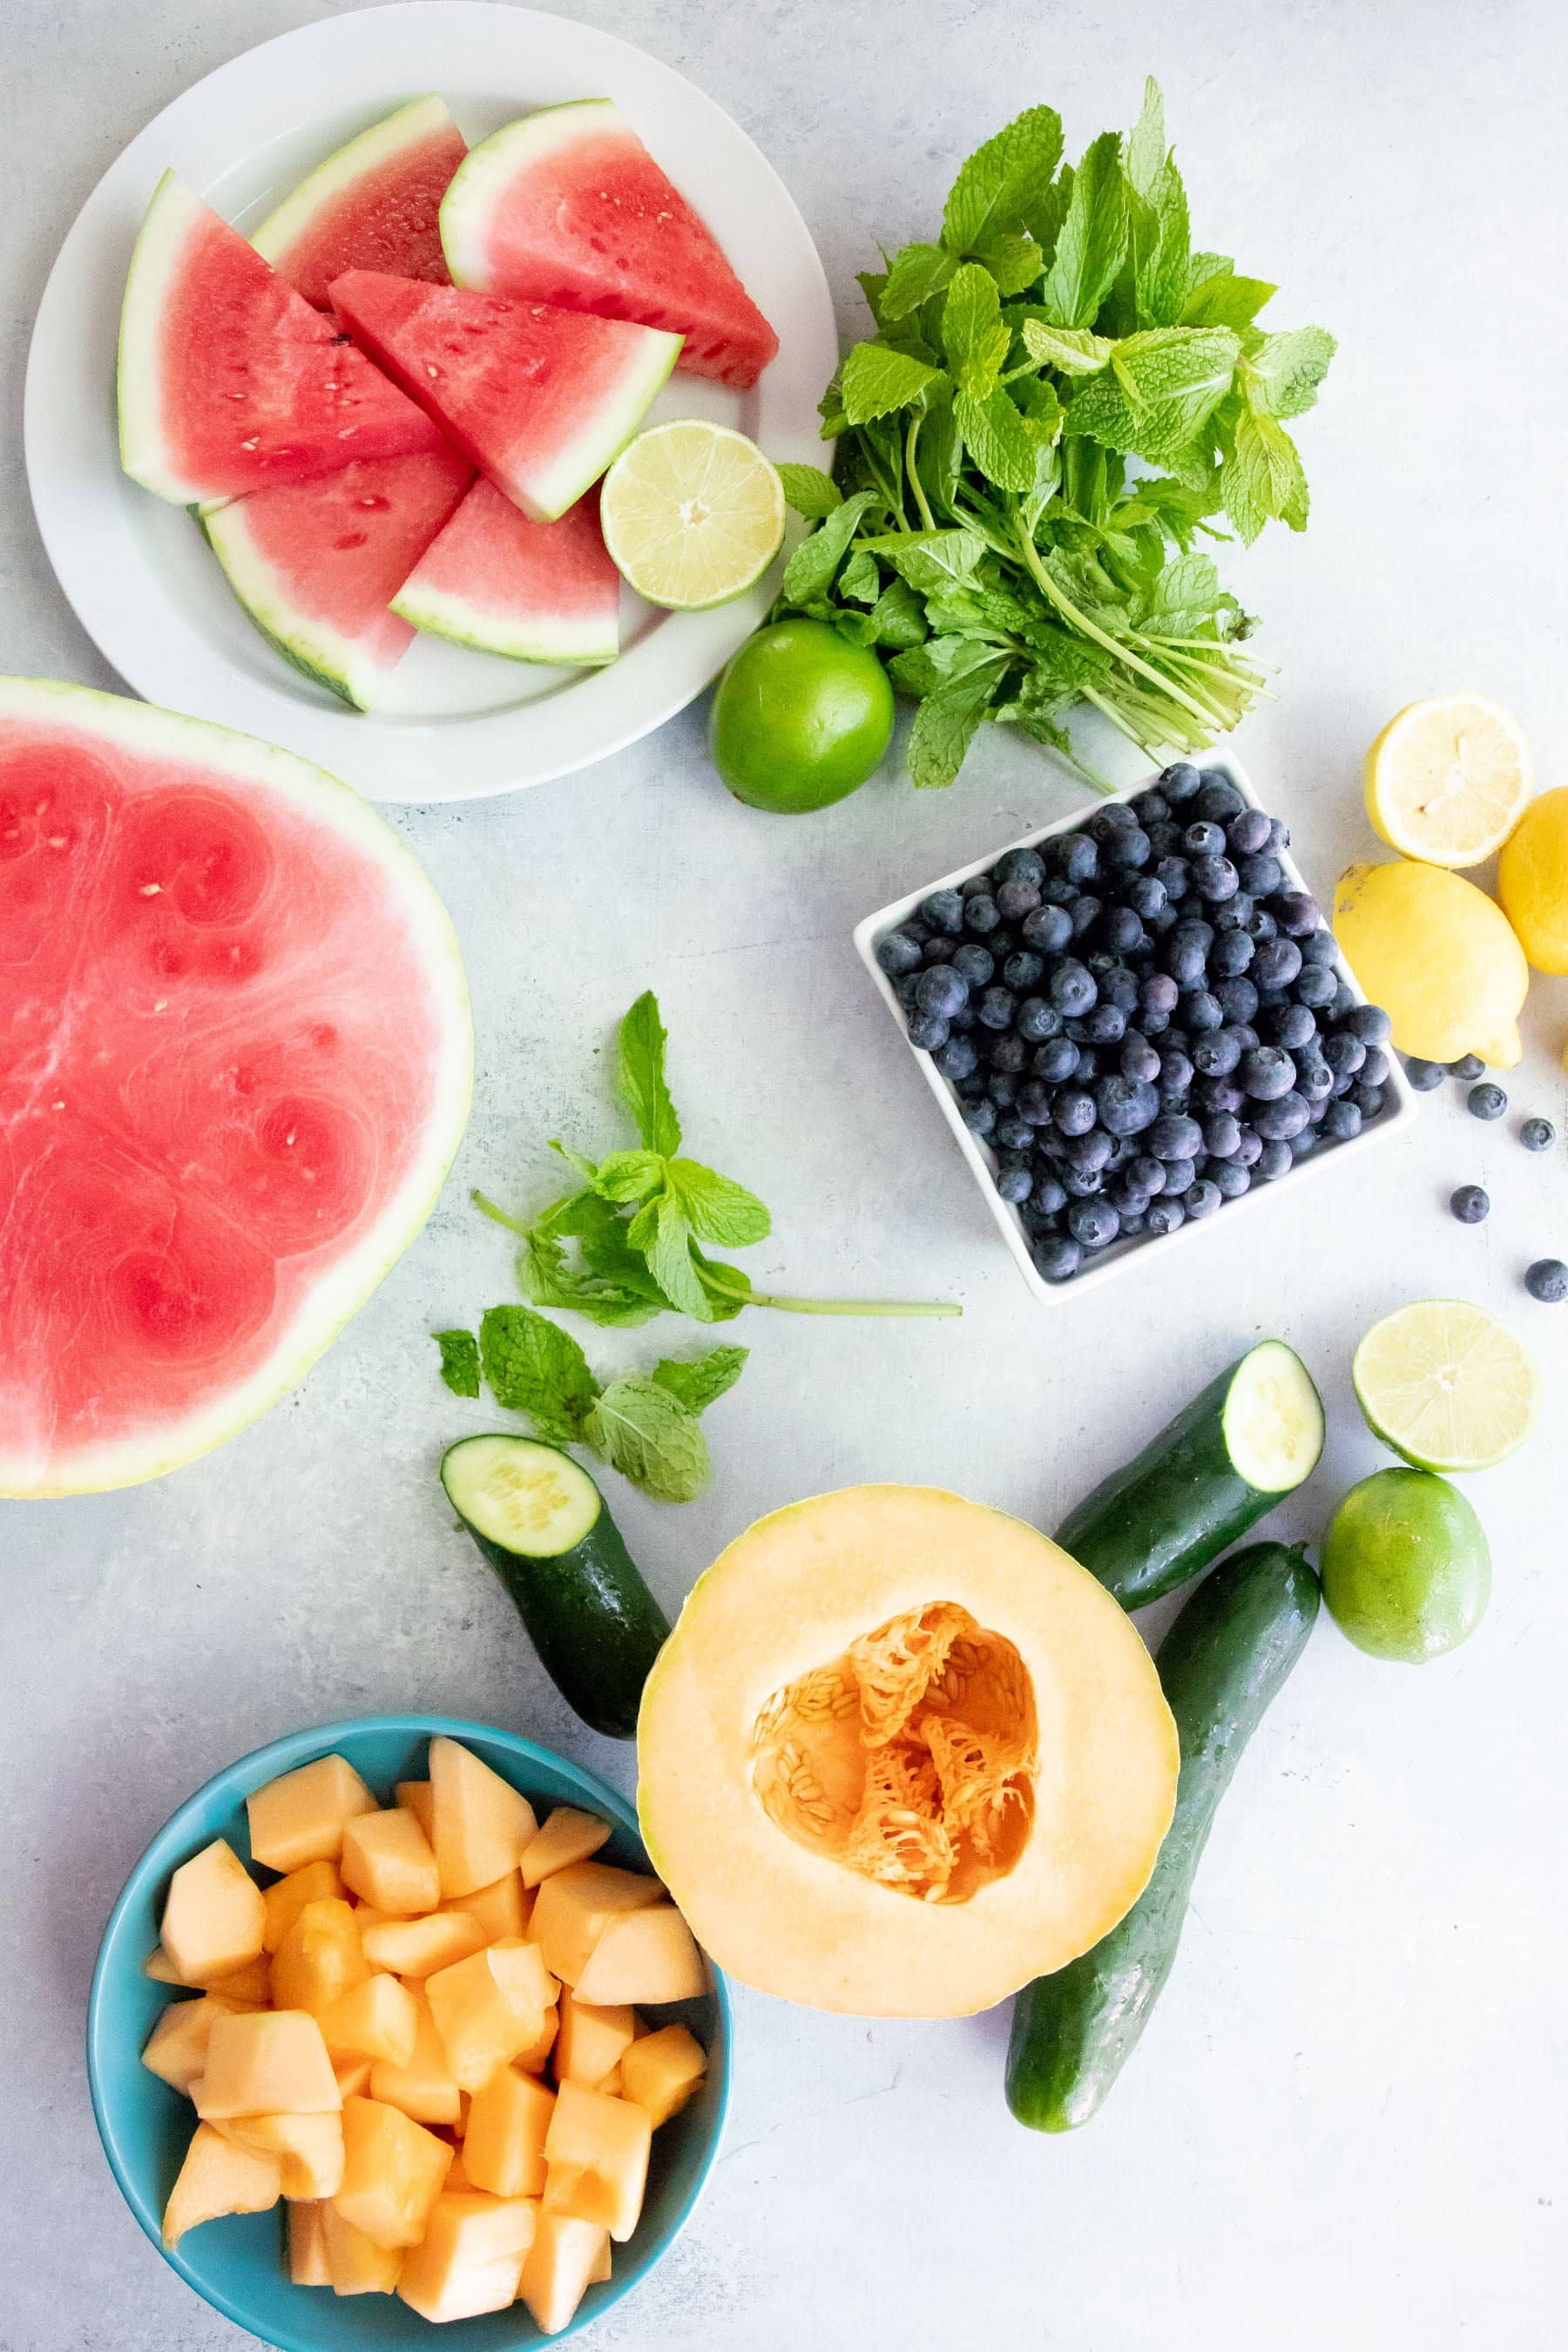 Ingredients for Frozen Fruit Pops arranged on a white background -- watermelon, cantaloupe, cucumber, blueberries, lemons, and limes